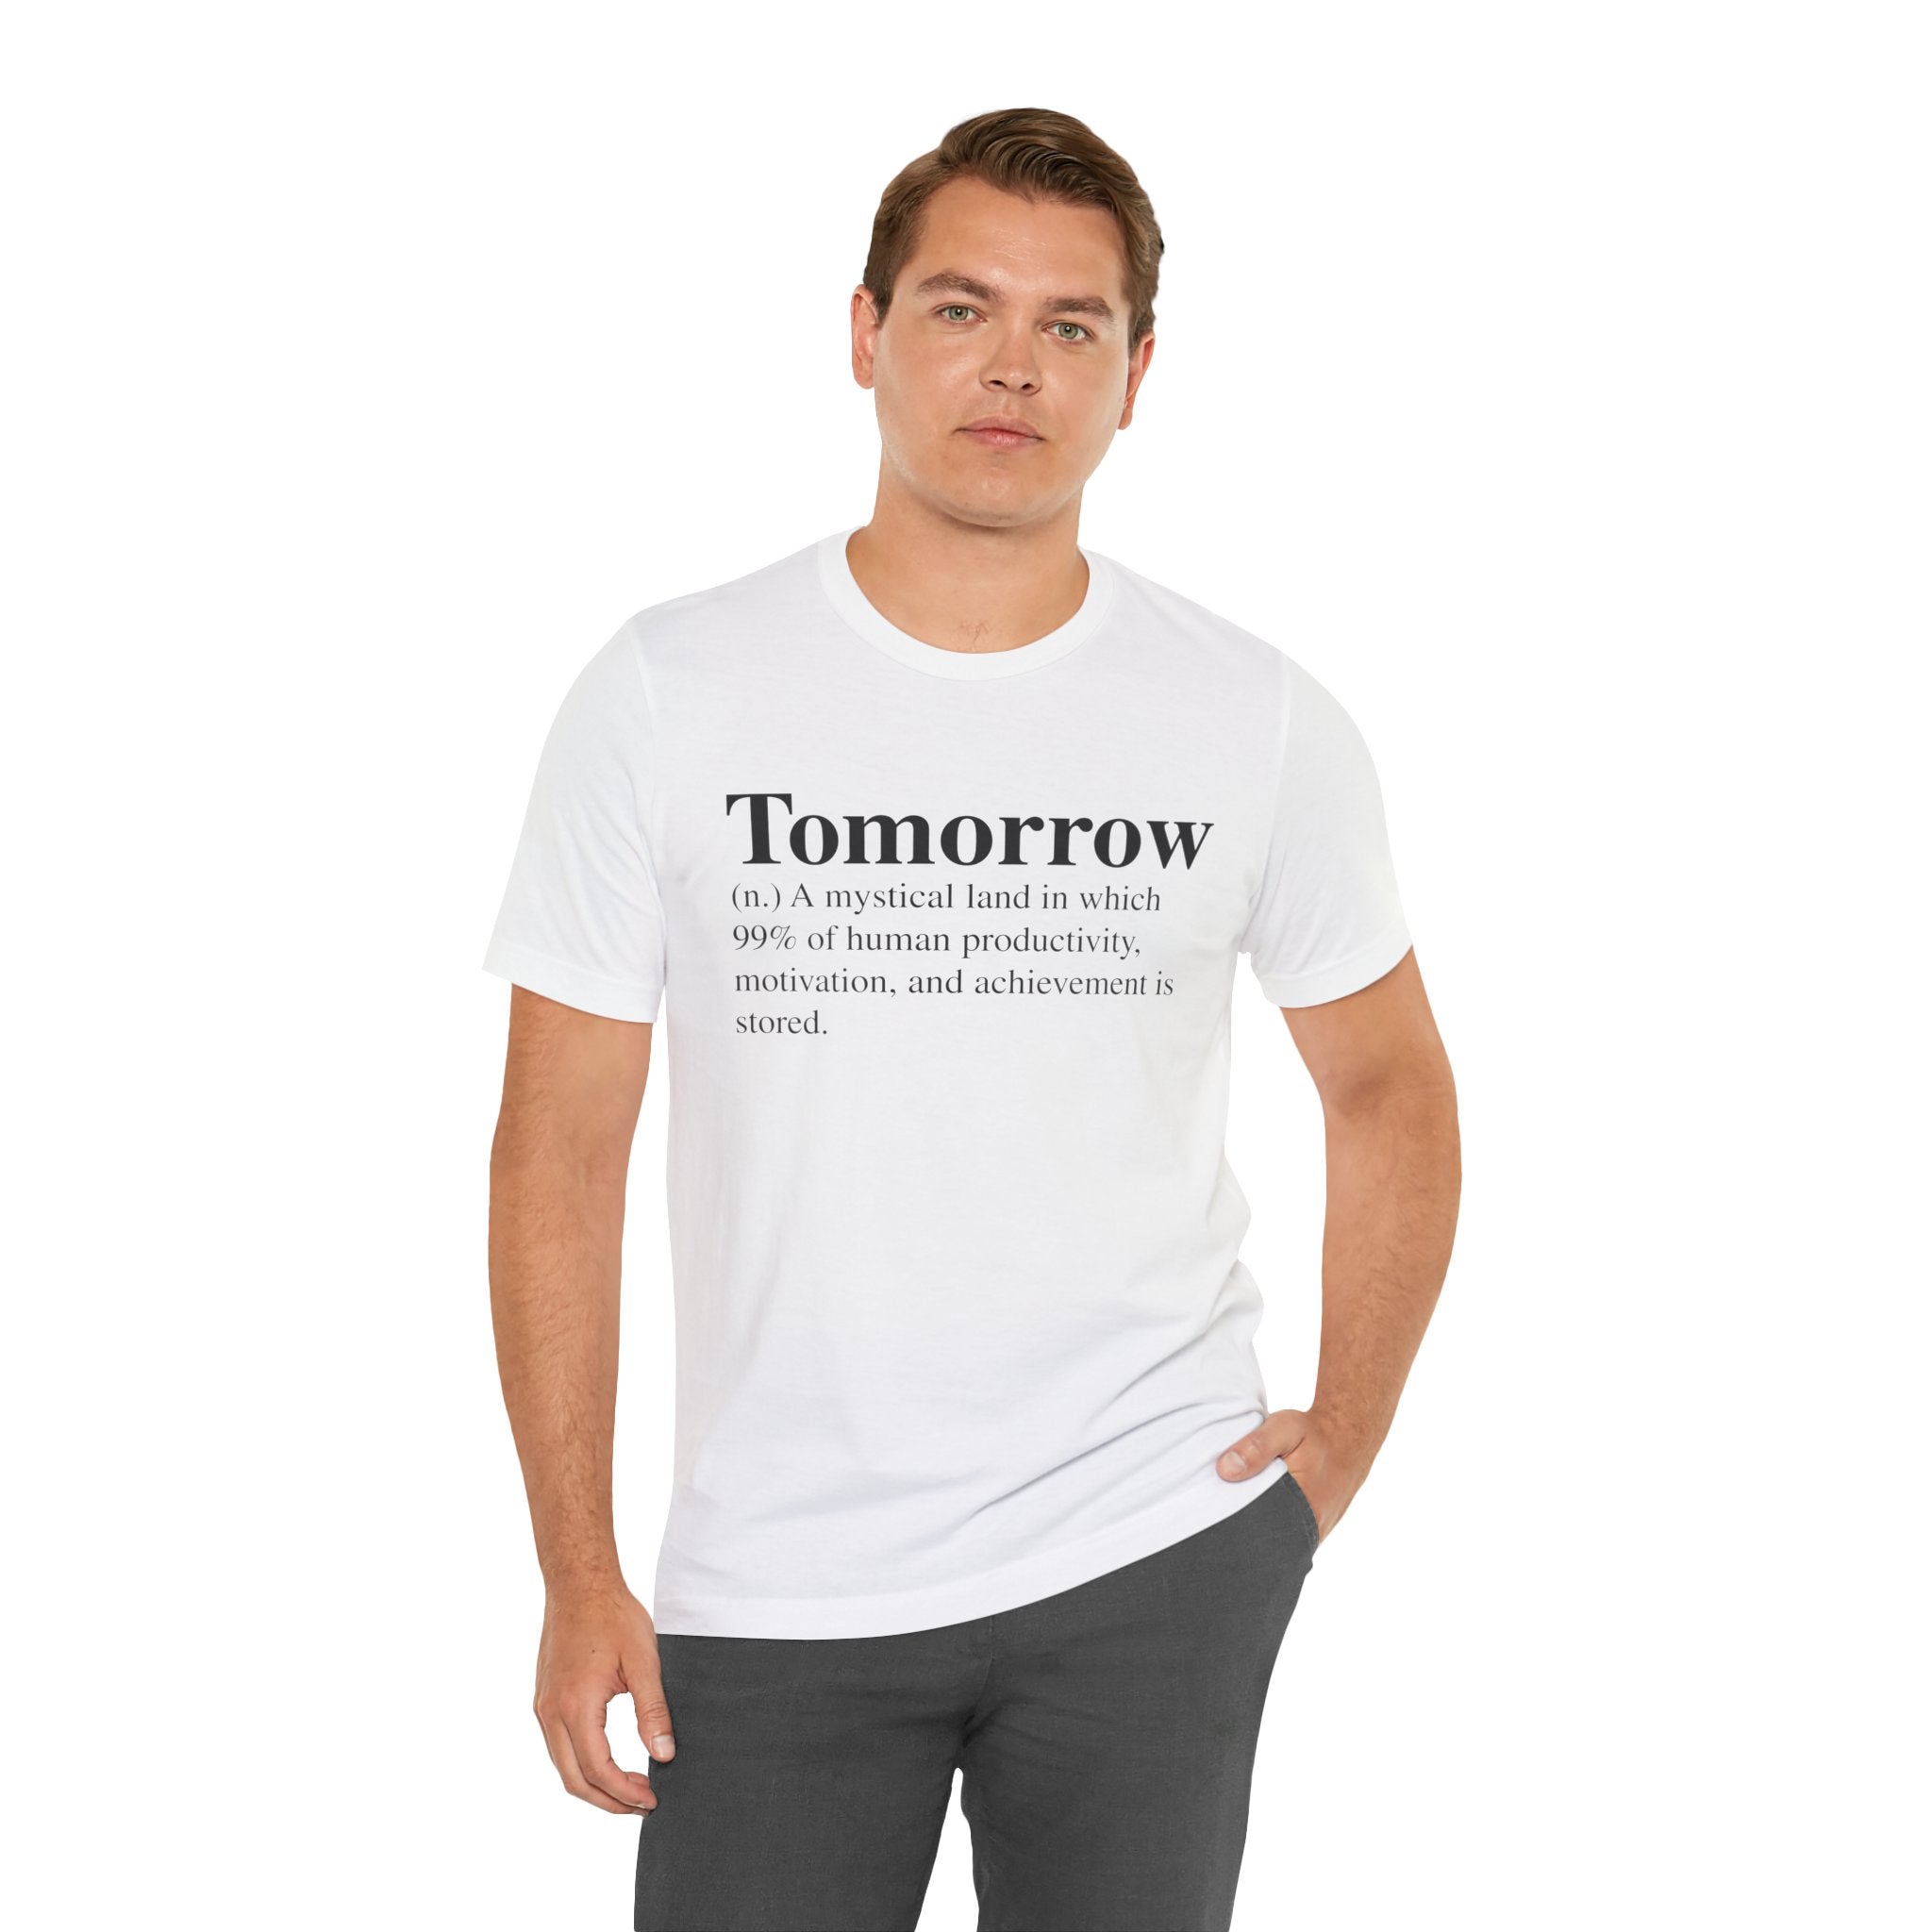 Man in a Tomorrow T-Shirt with text defining "tomorrow" as a mythical land related to productivity and achievement, posing against a white background.